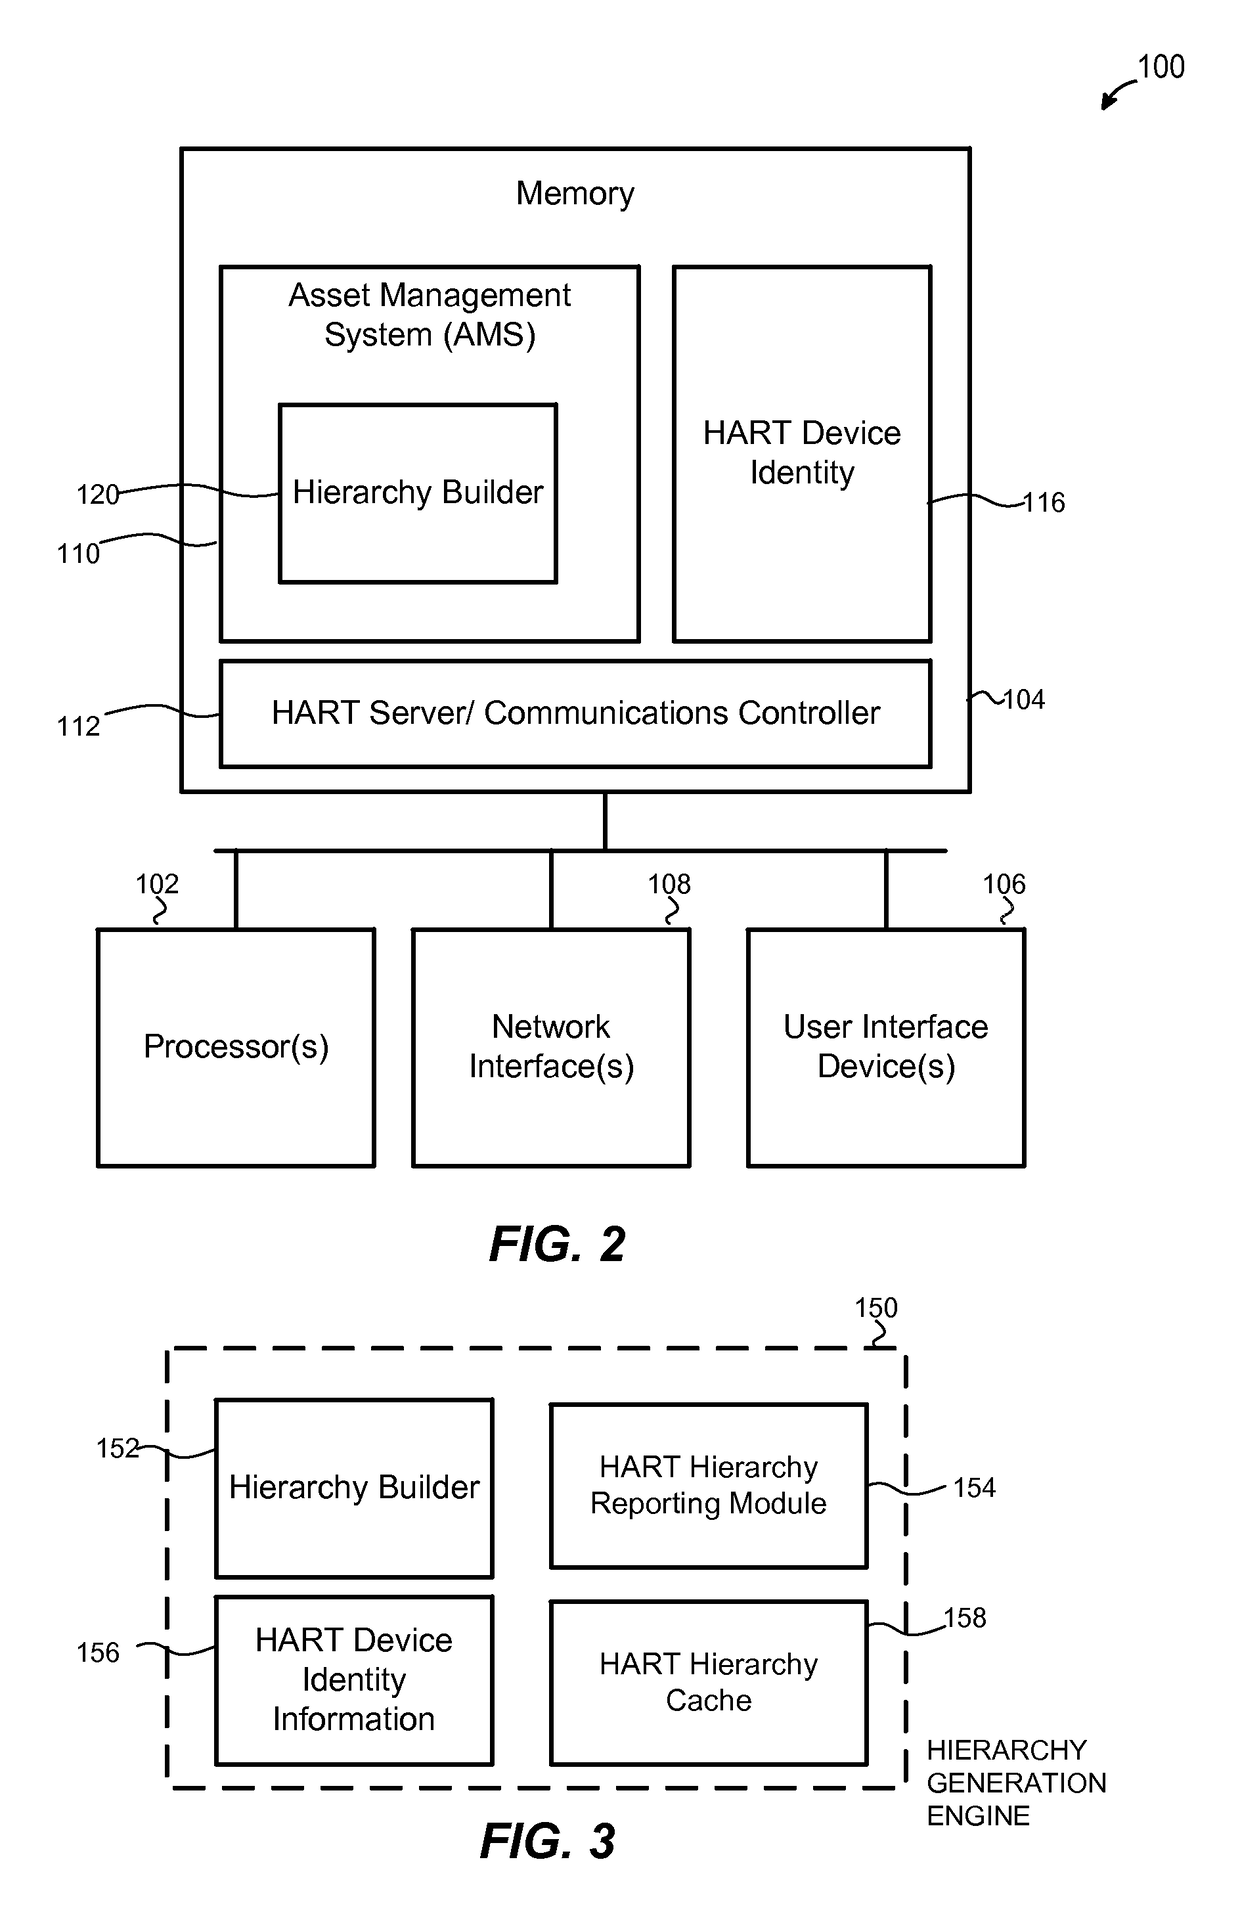 Device hierarchy building for a remote terminal unit